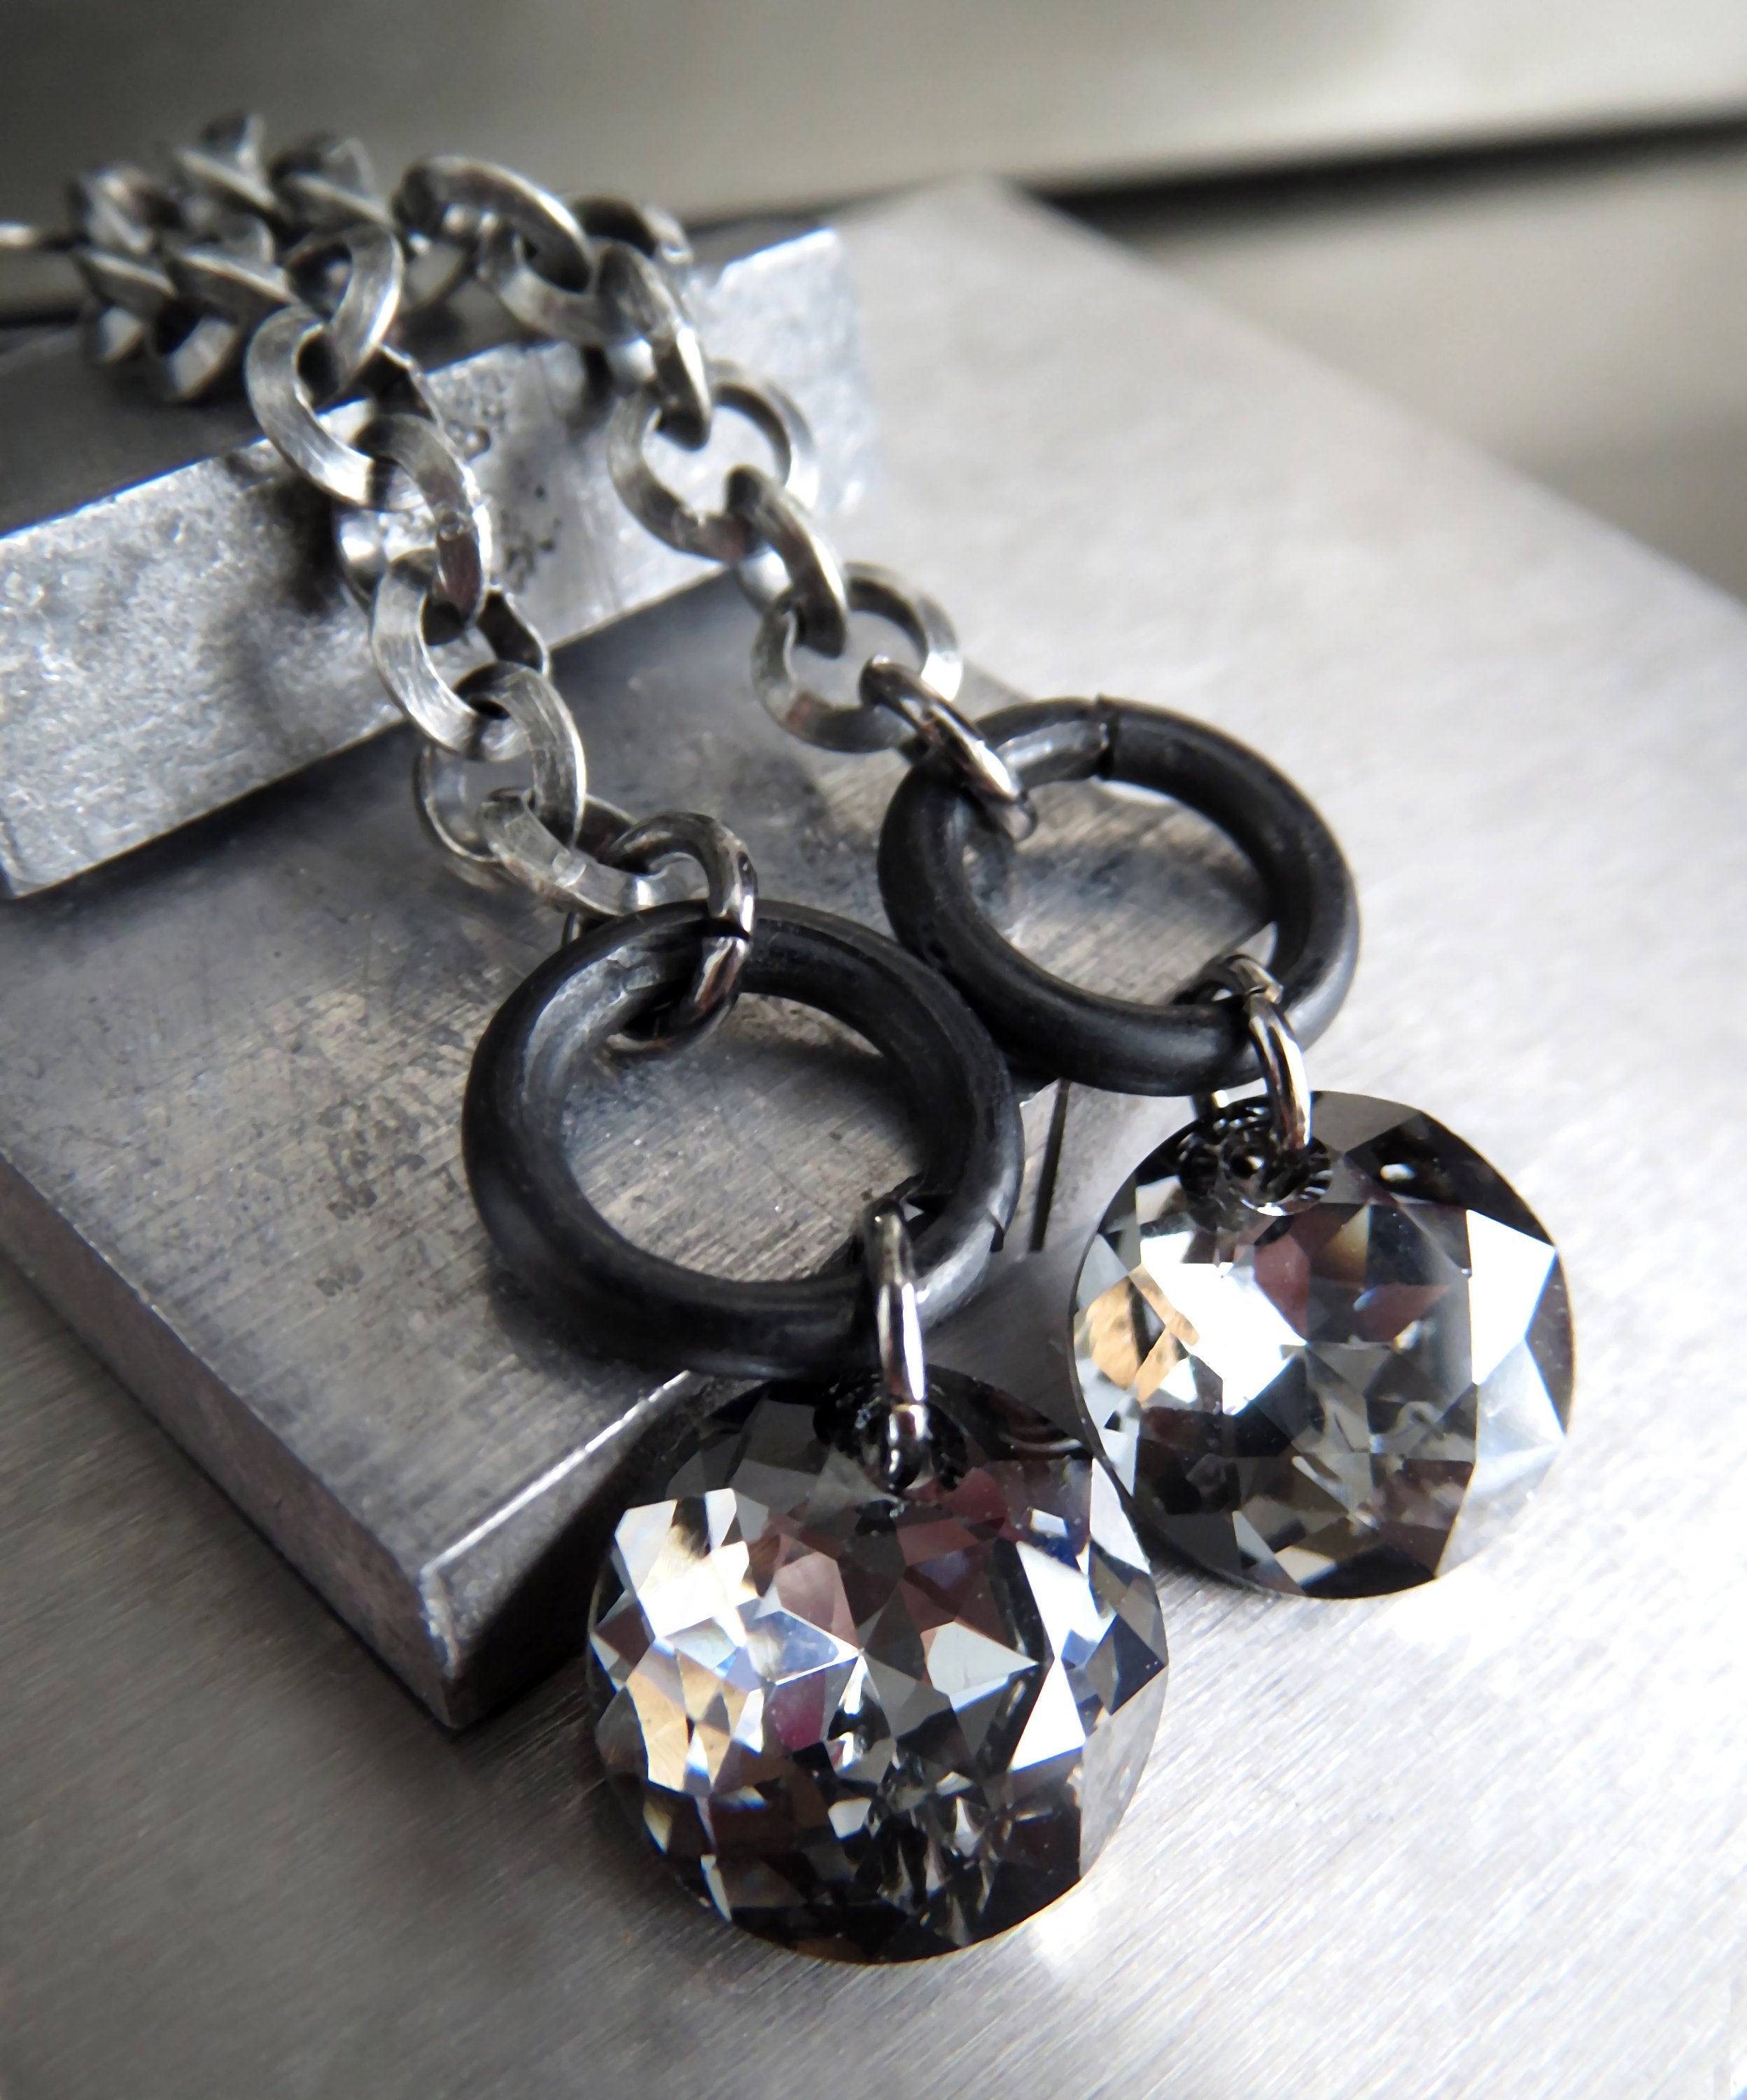 VOID - Long Antiqued Silver Circle Chain Earrings with Round Grey Gray Black Swarovski Crystal - Modern Geometric Industrial Style Jewelry